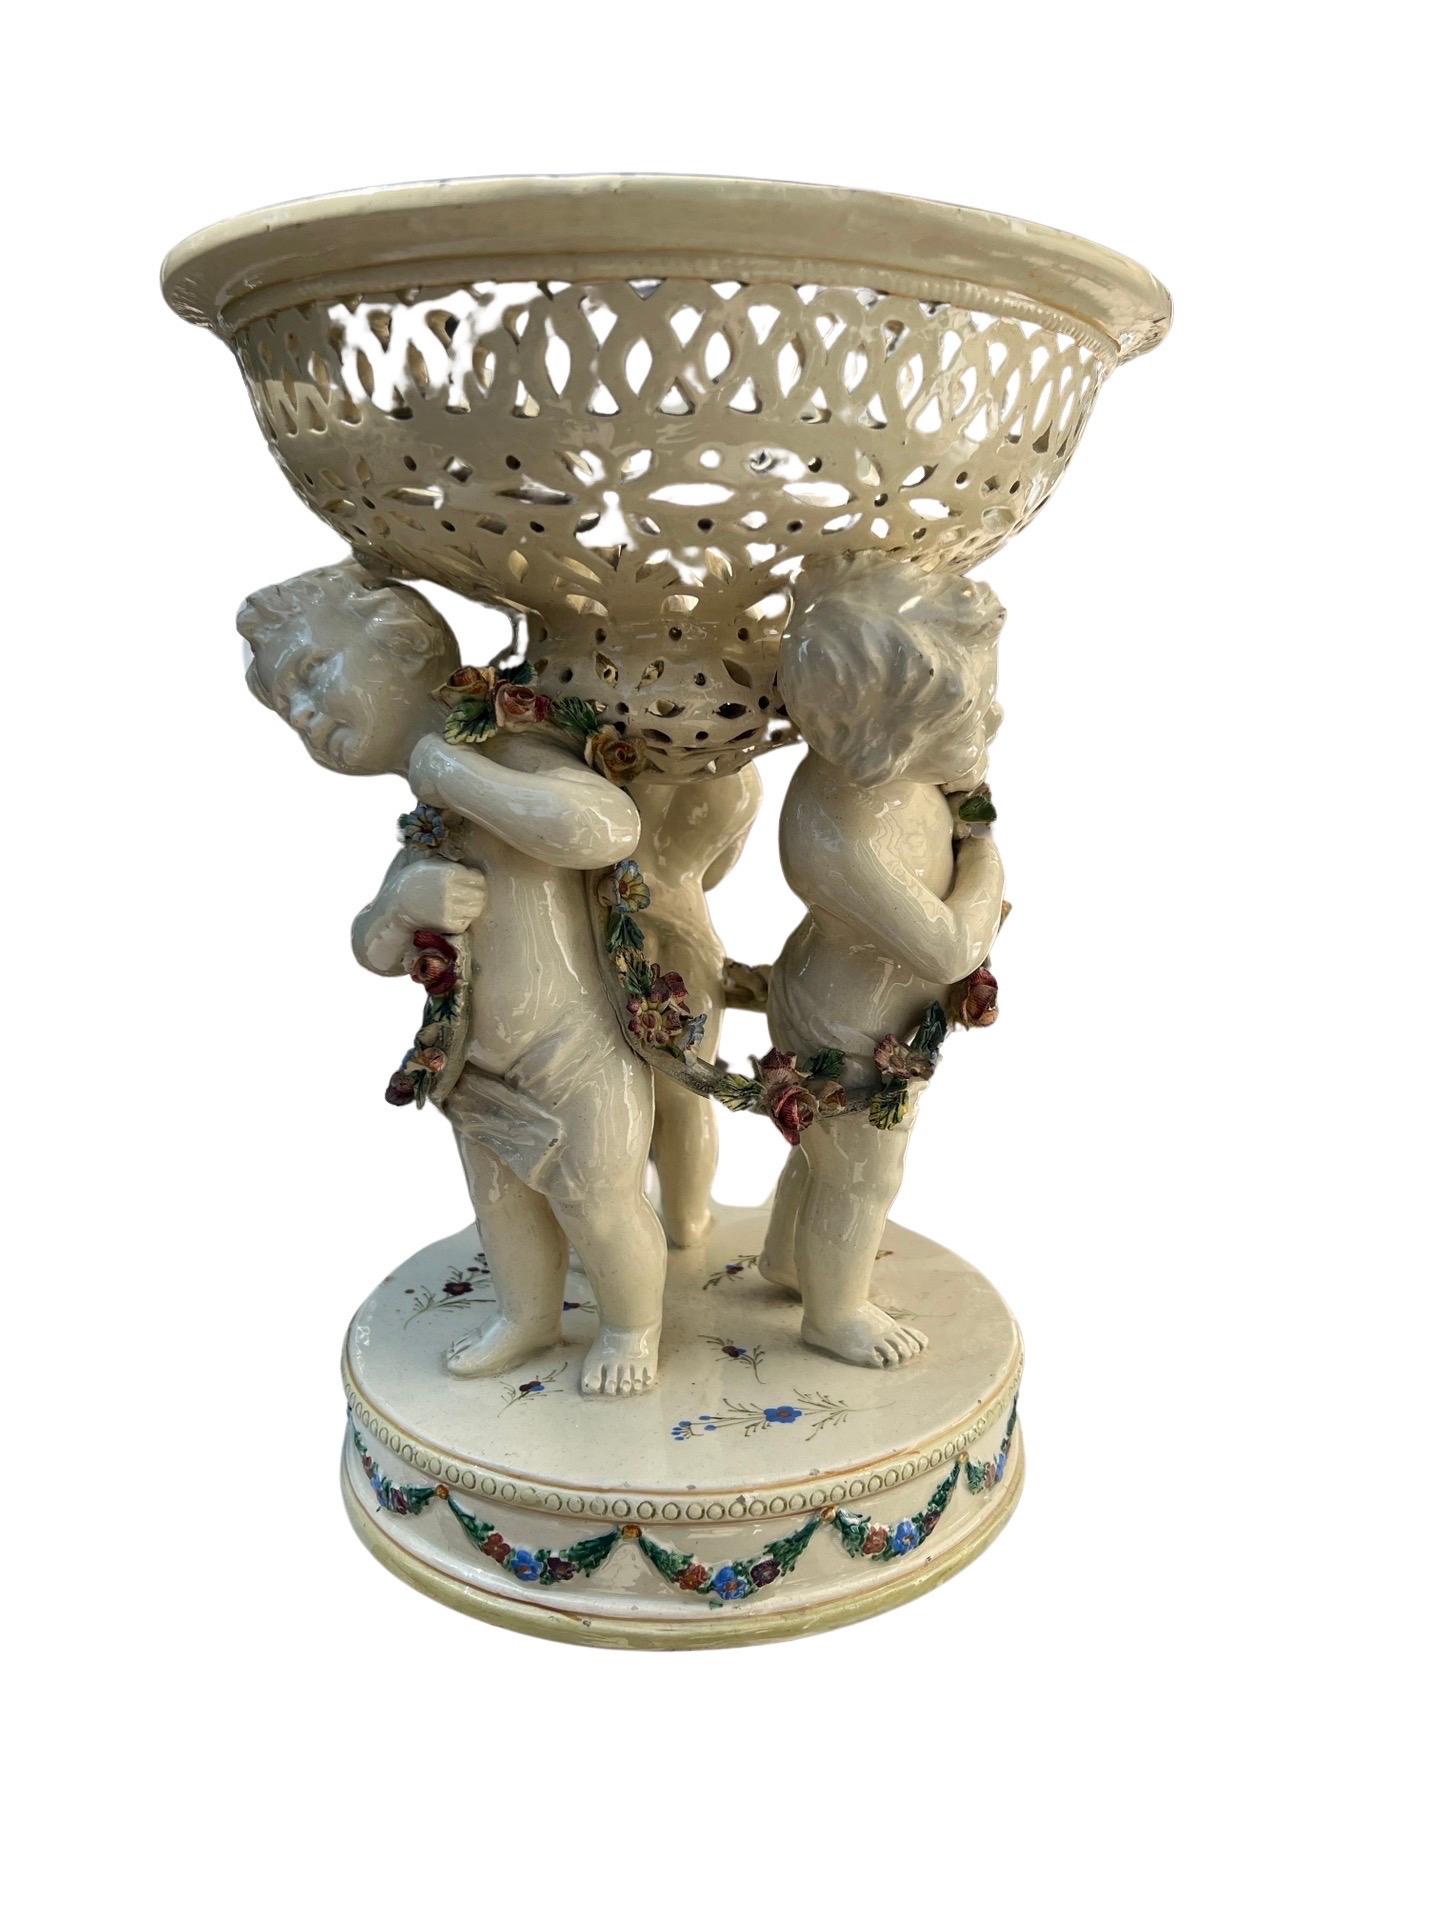 19th Century French Tin Glazed Creamware Centerpiece Adorned With Putti Supports For Sale 5